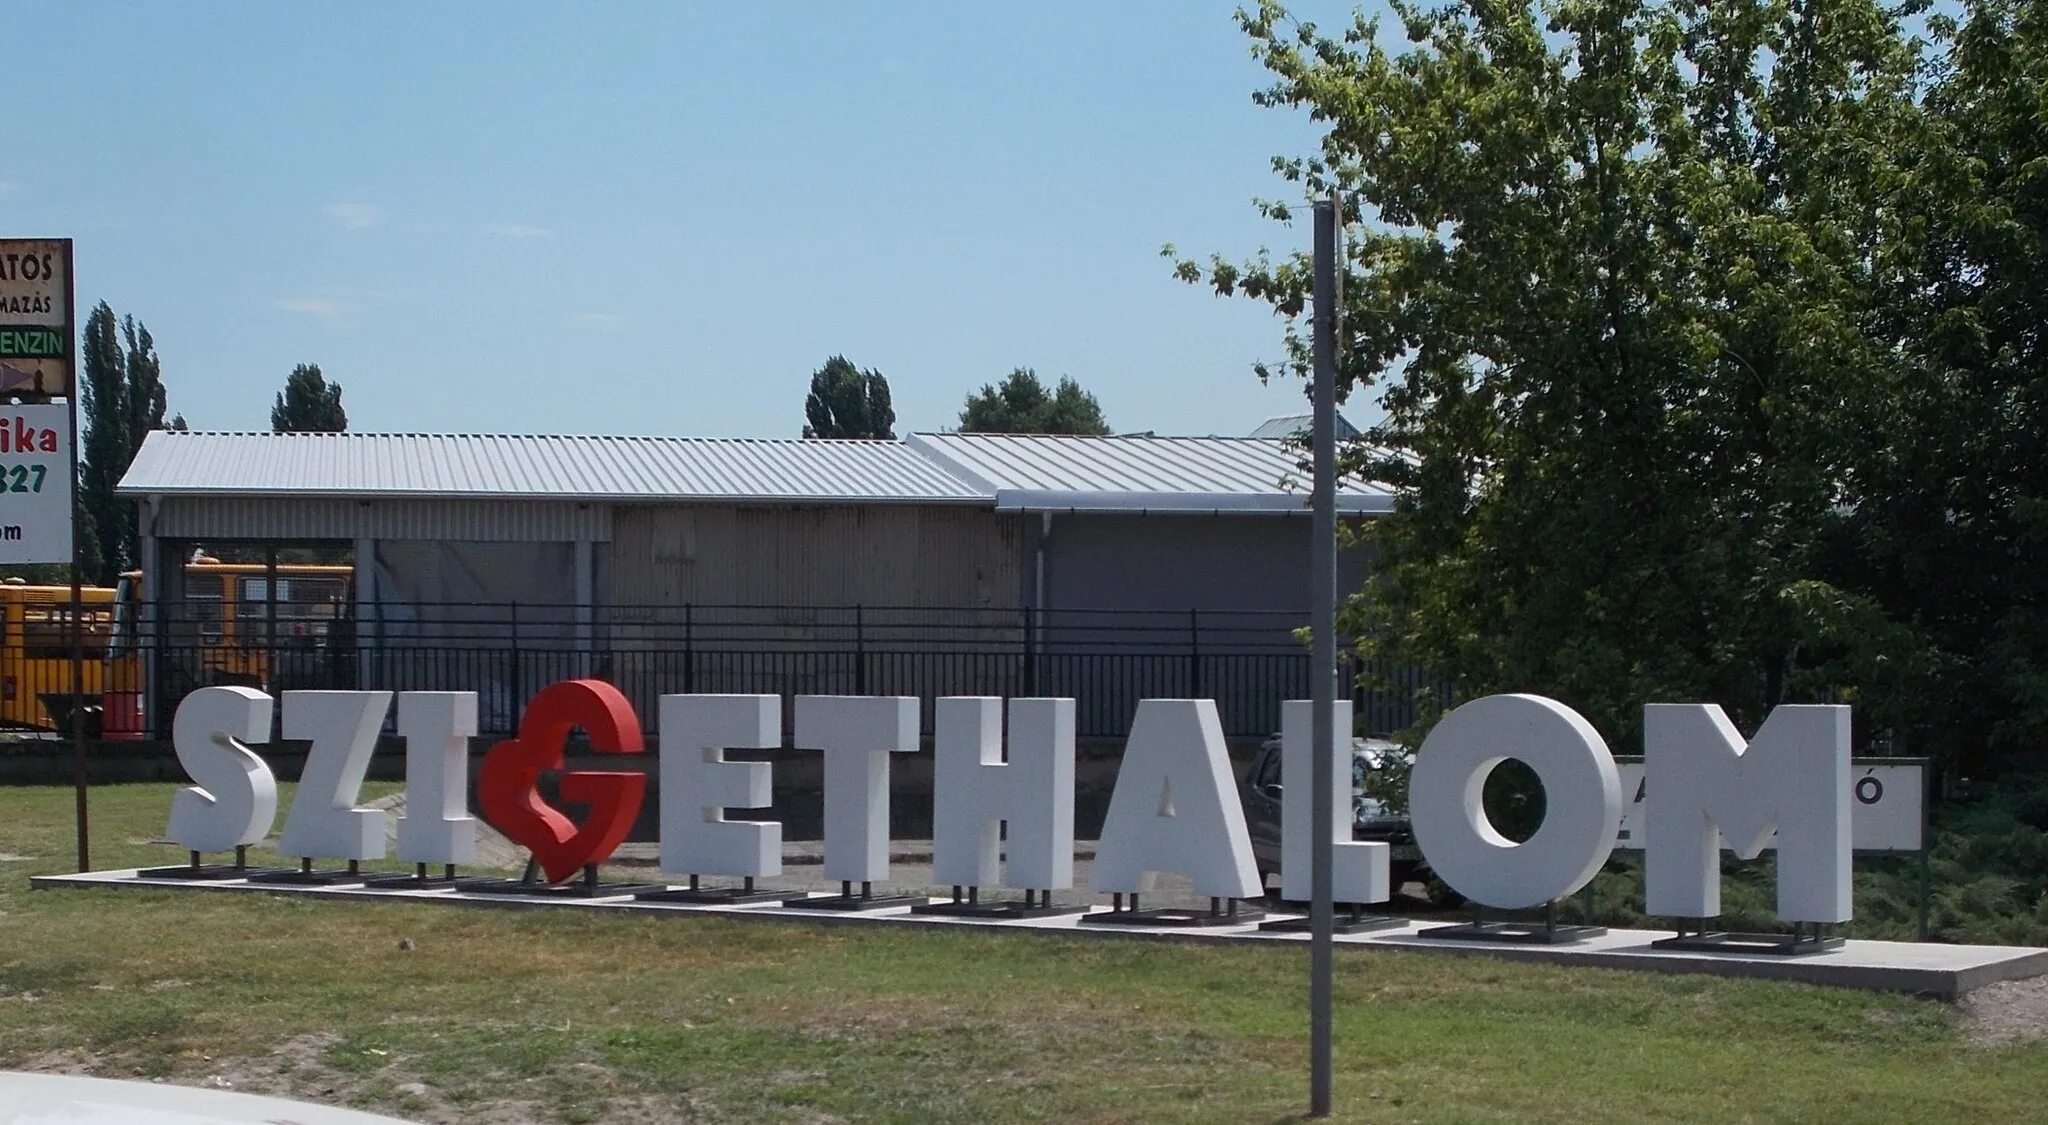 Photo showing: : City name sign before the bus depot. - Mű út (Road 51104), Szigethalom, Pest County, Hungary